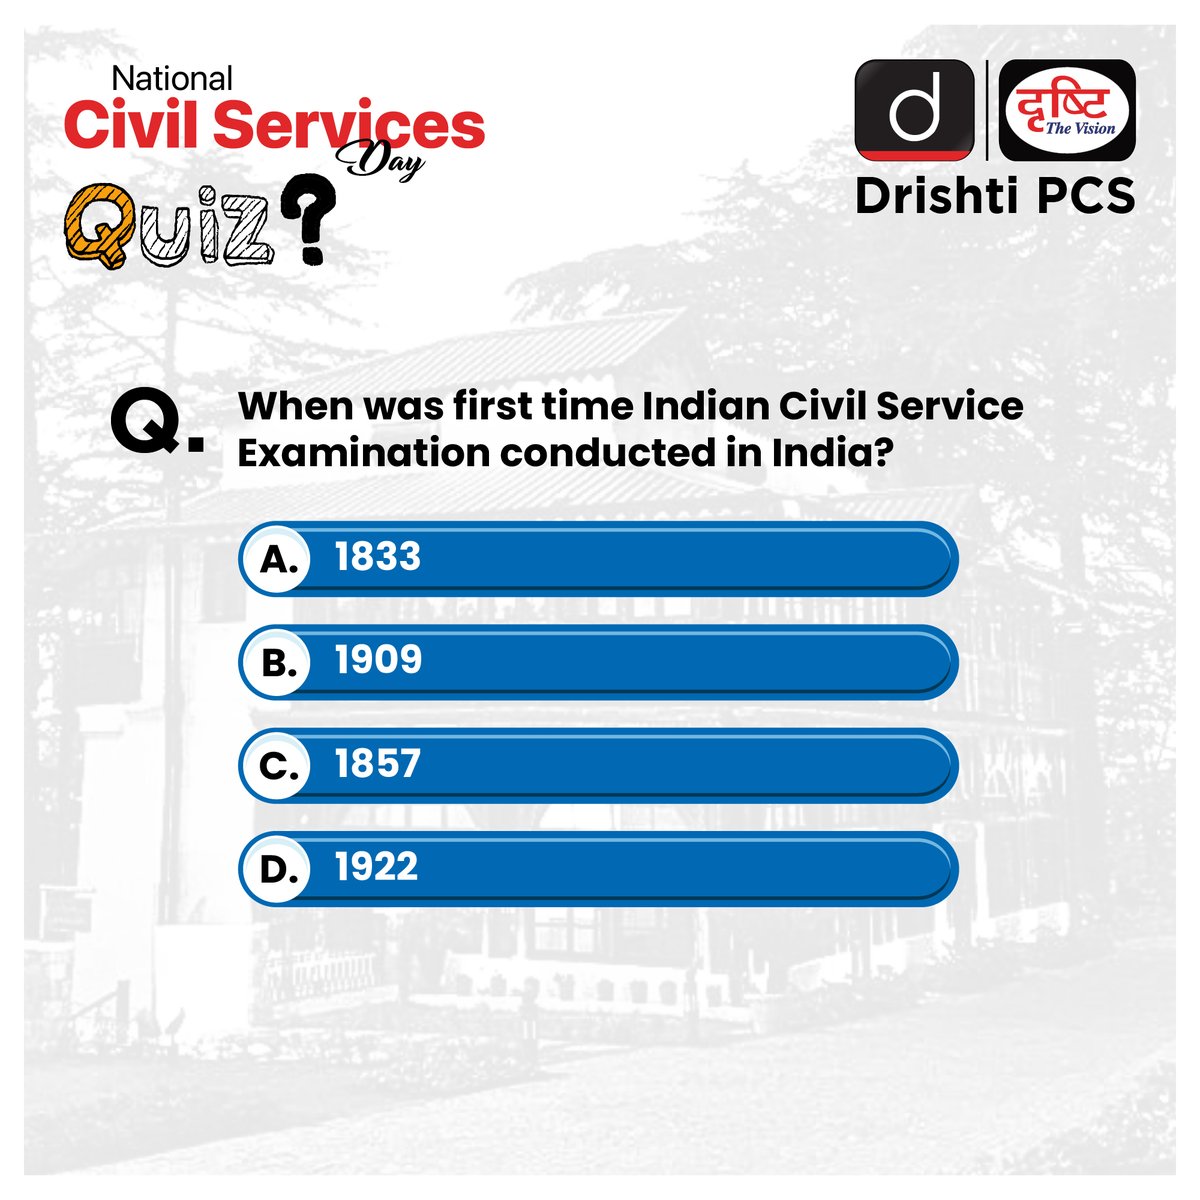 Explore the Civil Service 'Firsts' on National Civil Services Day. Share your answers in the comment section.

#CivilServicesDay #National #ServiceDay #JaiHind #UPSC #SardarVallabhBhaiPatel #PublicServices #Patriots  #Leadership #IPS #India #DrishtiIAS #DrishtiIASEnglish